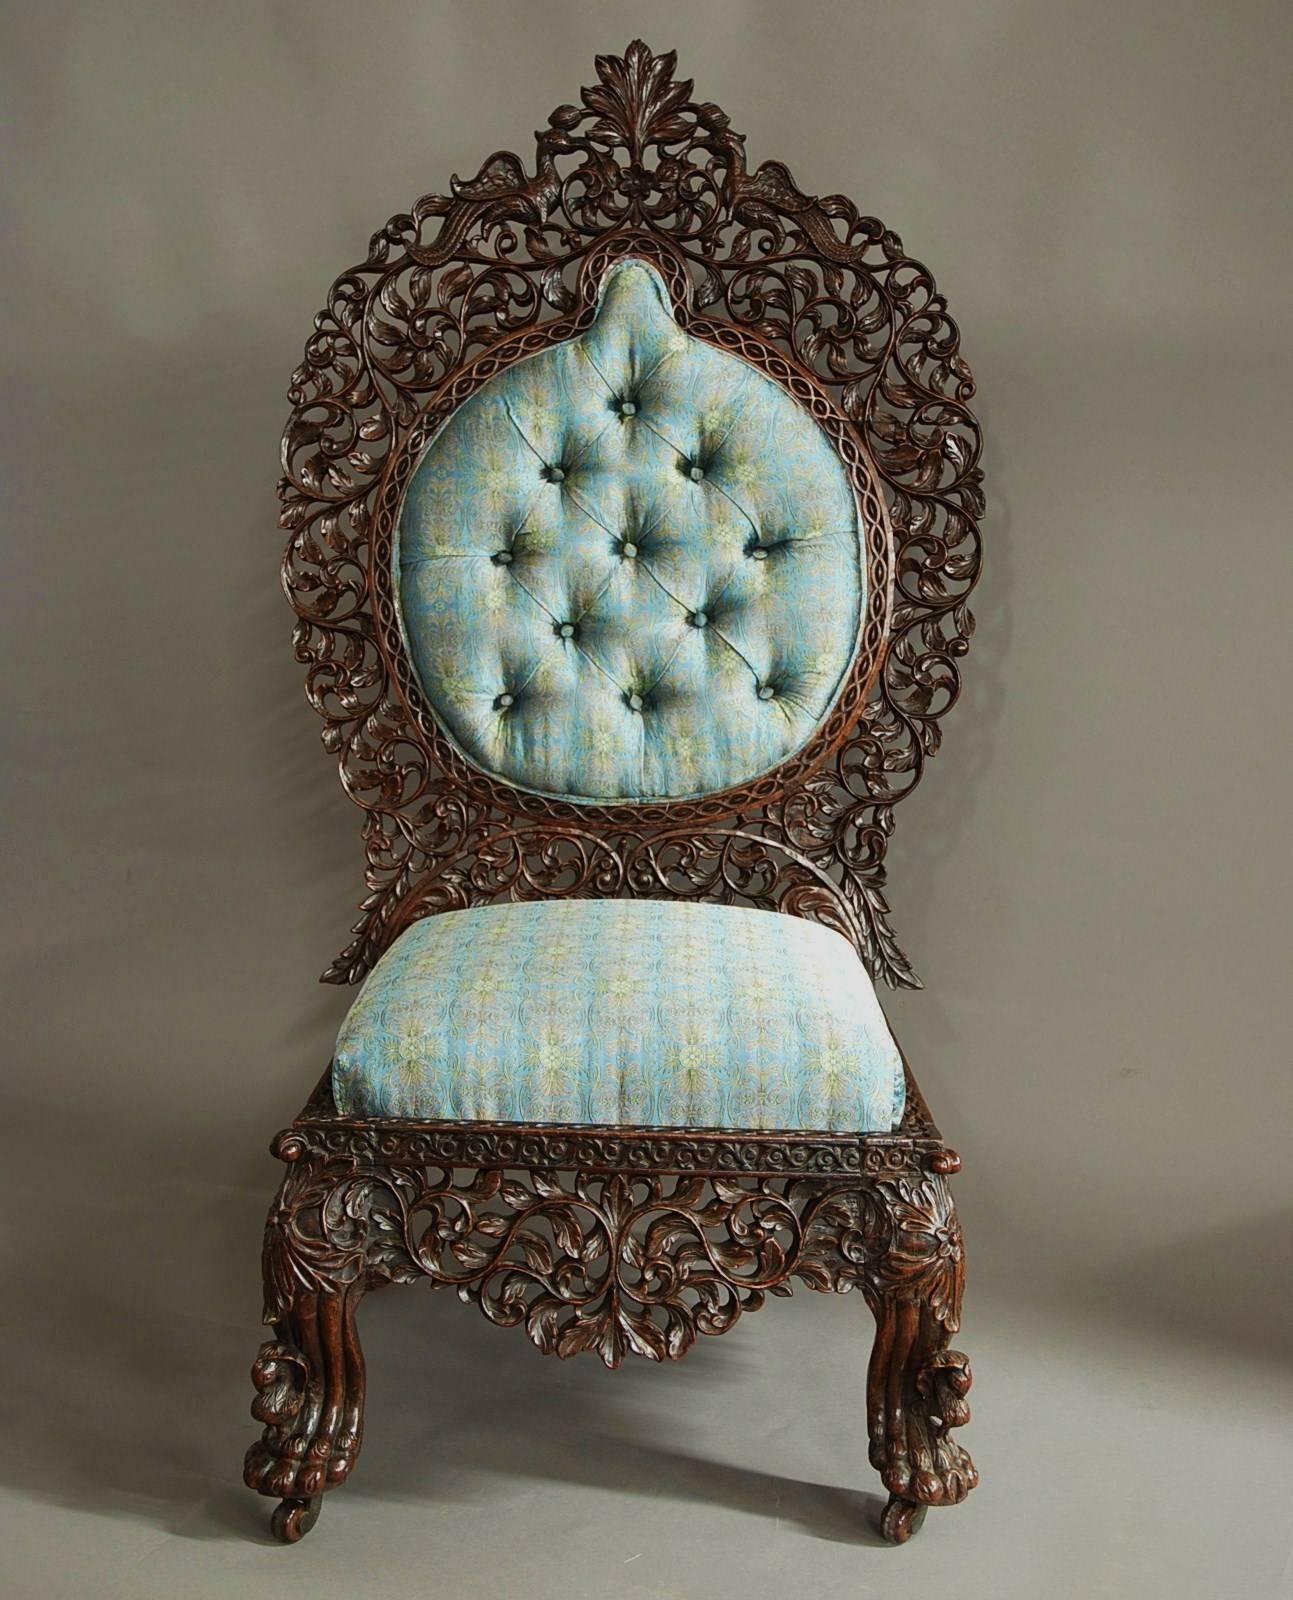 A mid-19th century superb quality Anglo-Indian rosewood profusely carved and upholstered side chair, probably from the Bombay region of large proportions.

This chairs consist of an elaborately carved back with central leaf decoration to the top